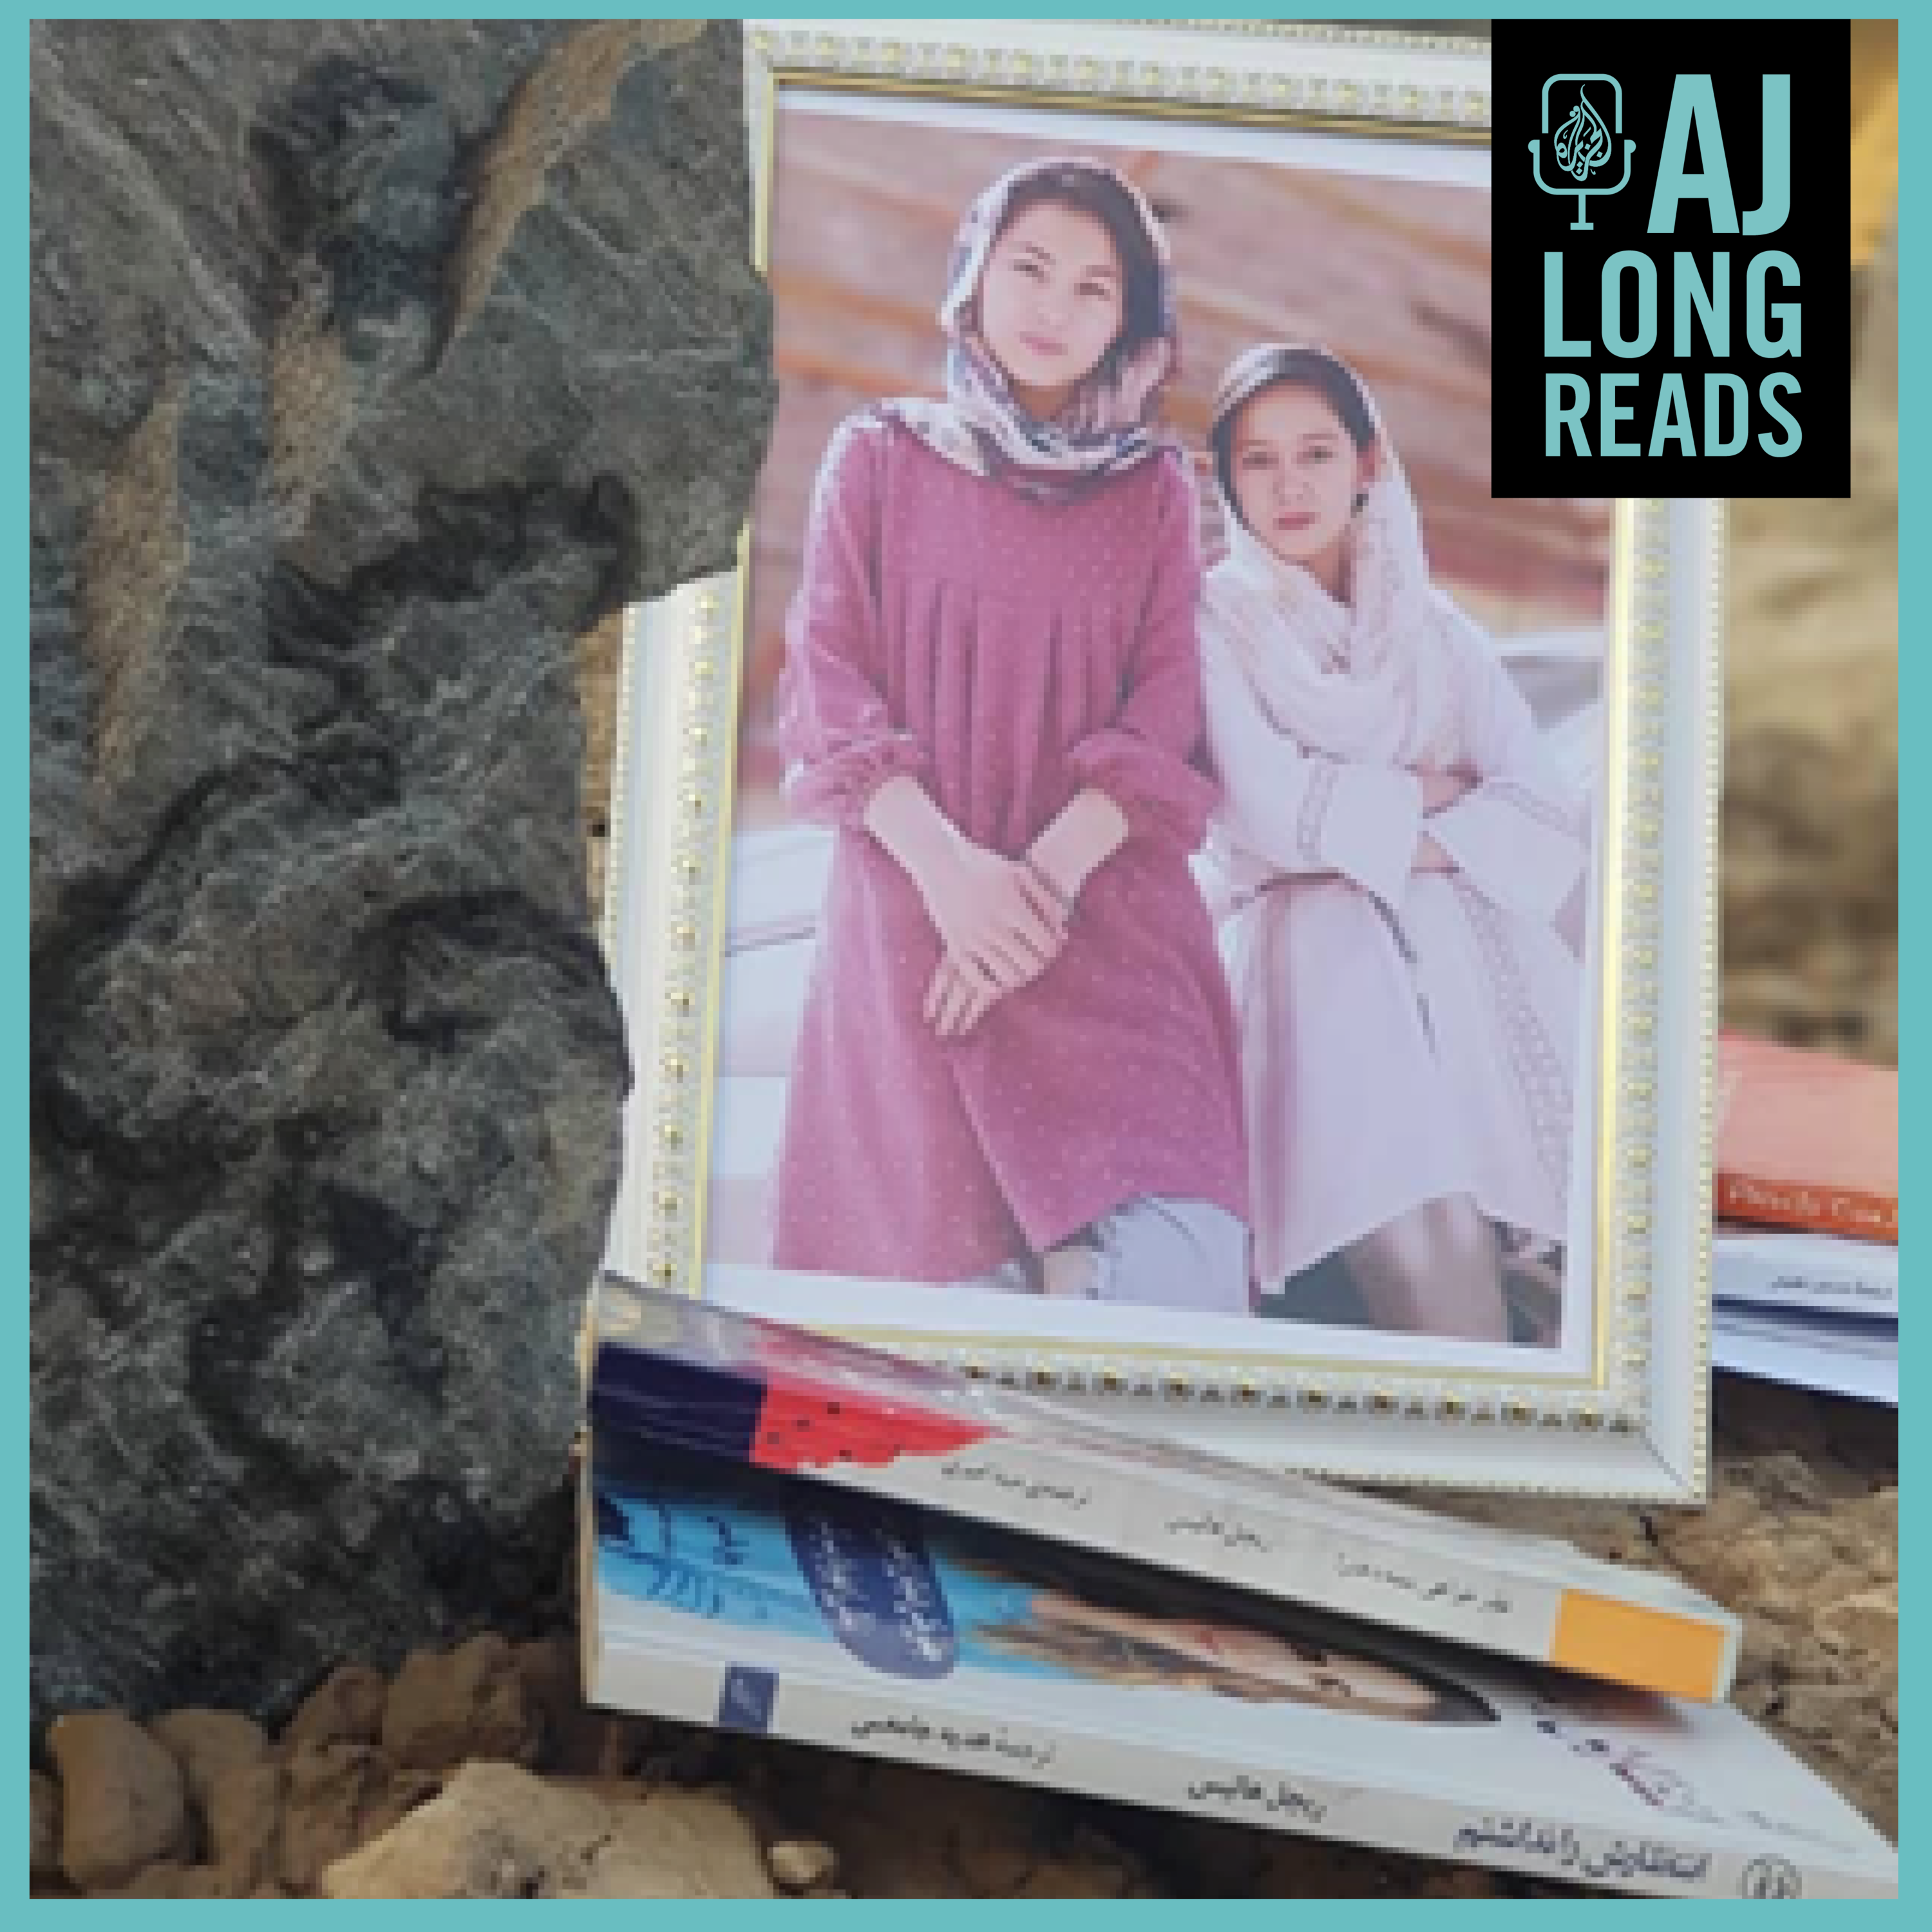 ‘Books they love’: A Kabul graveyard library for two schoolgirls